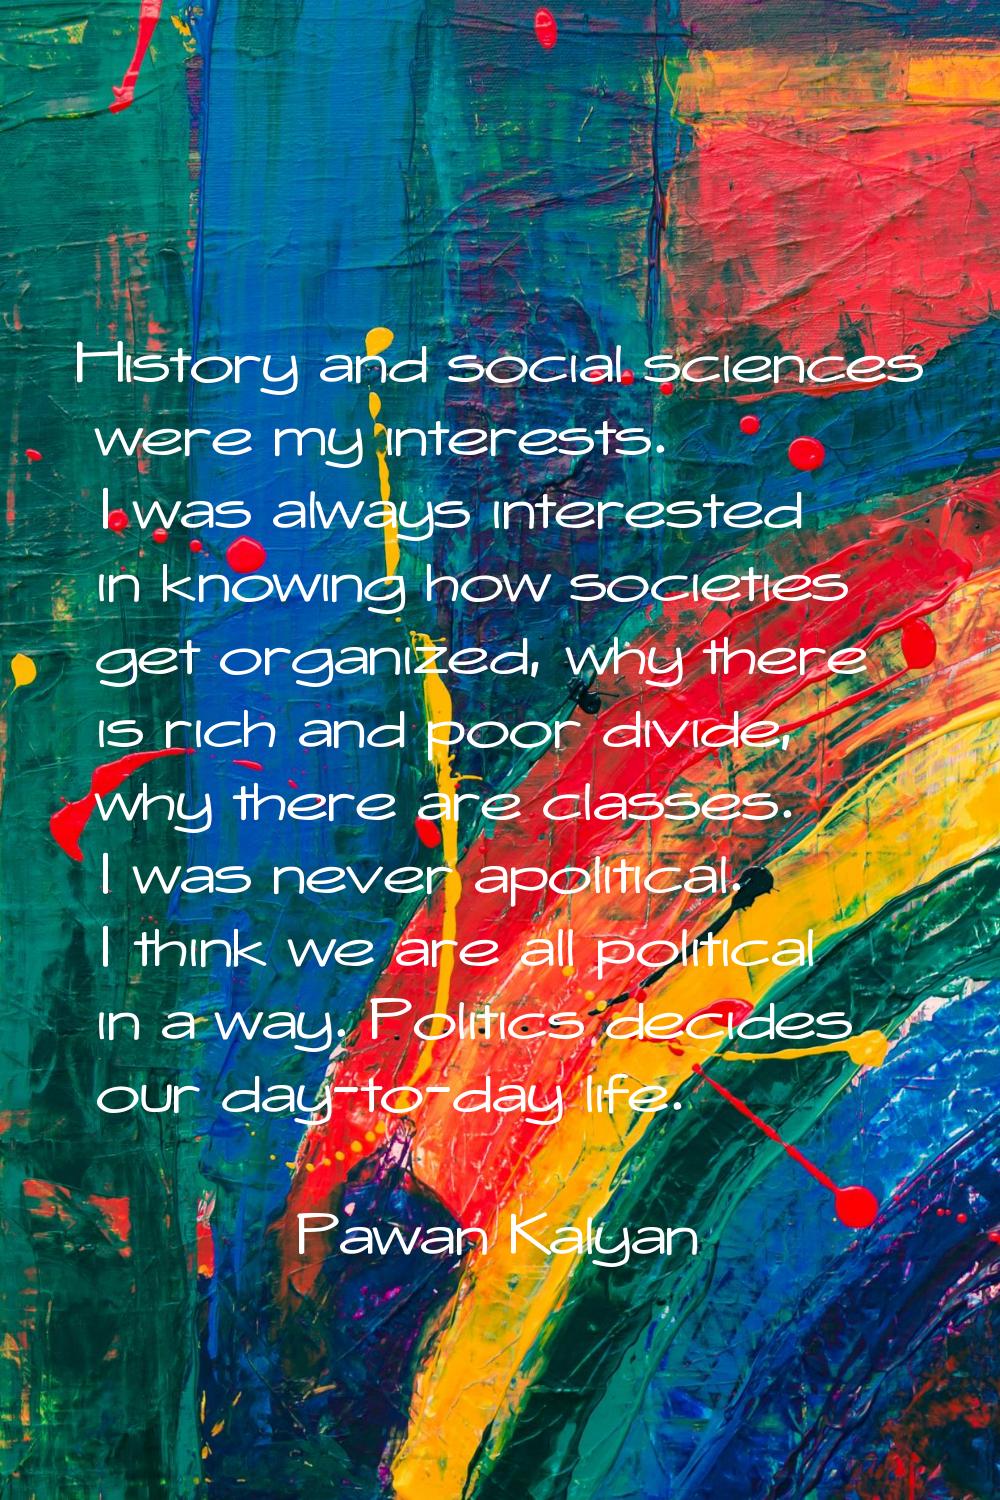 History and social sciences were my interests. I was always interested in knowing how societies get